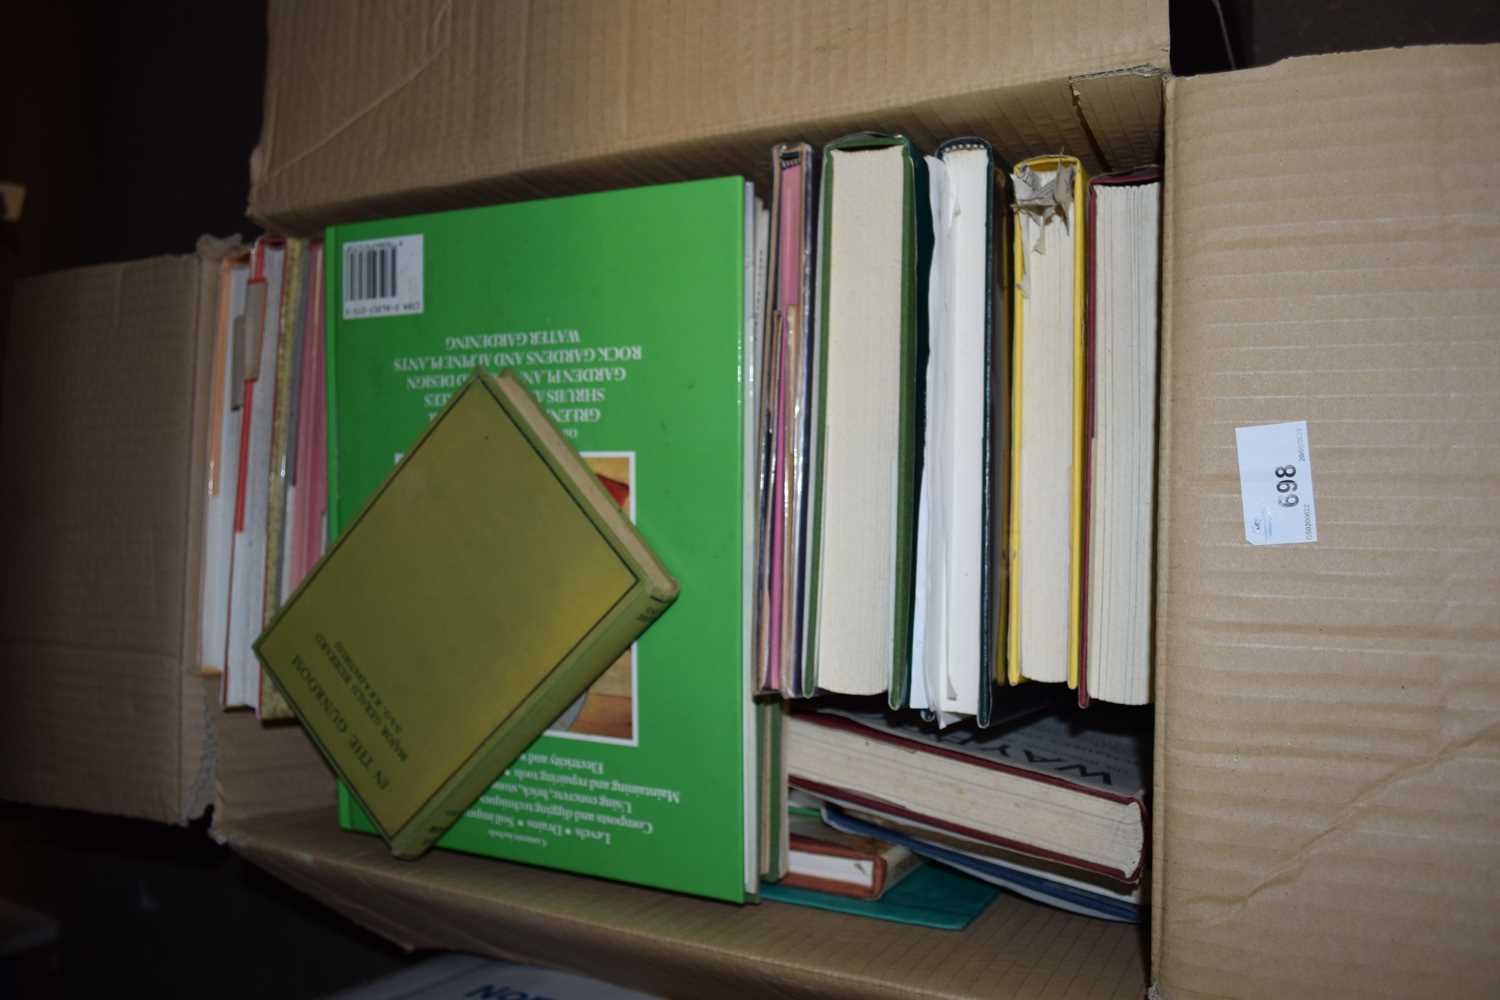 ONE BOX OF MIXED BOOKS